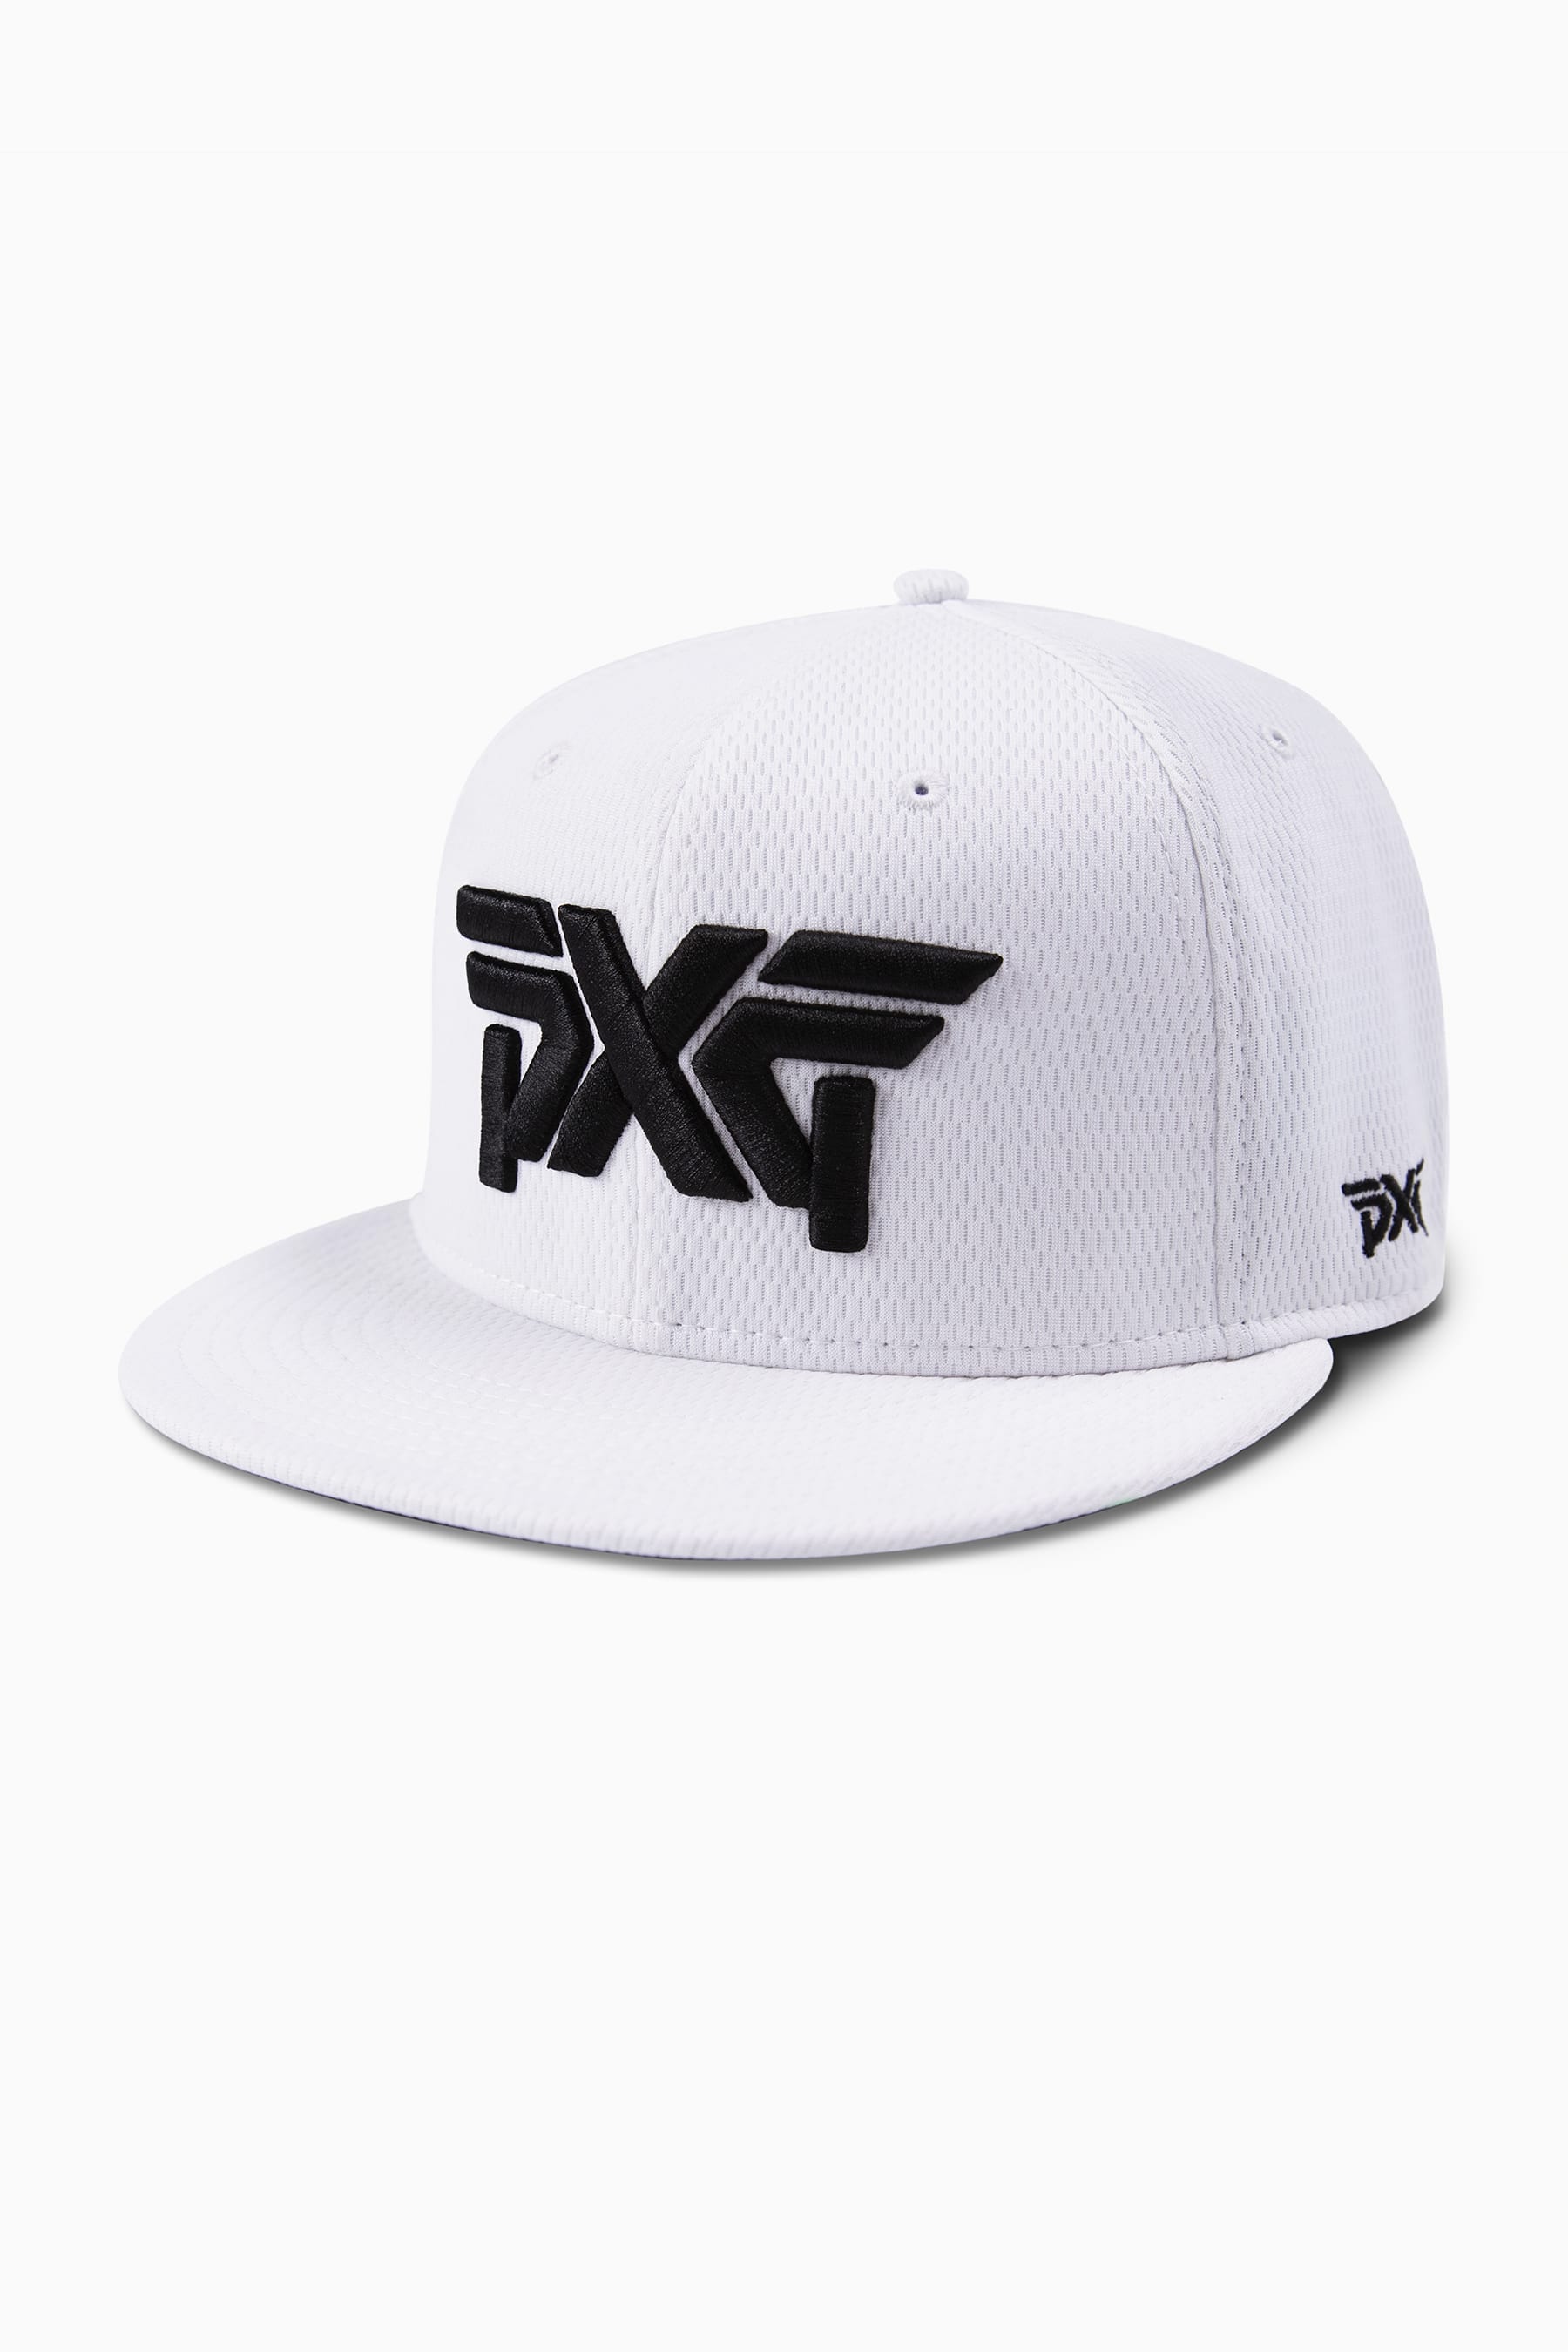 Performance 59FIFTY Fitted Cap | Shop the Highest Quality Golf 